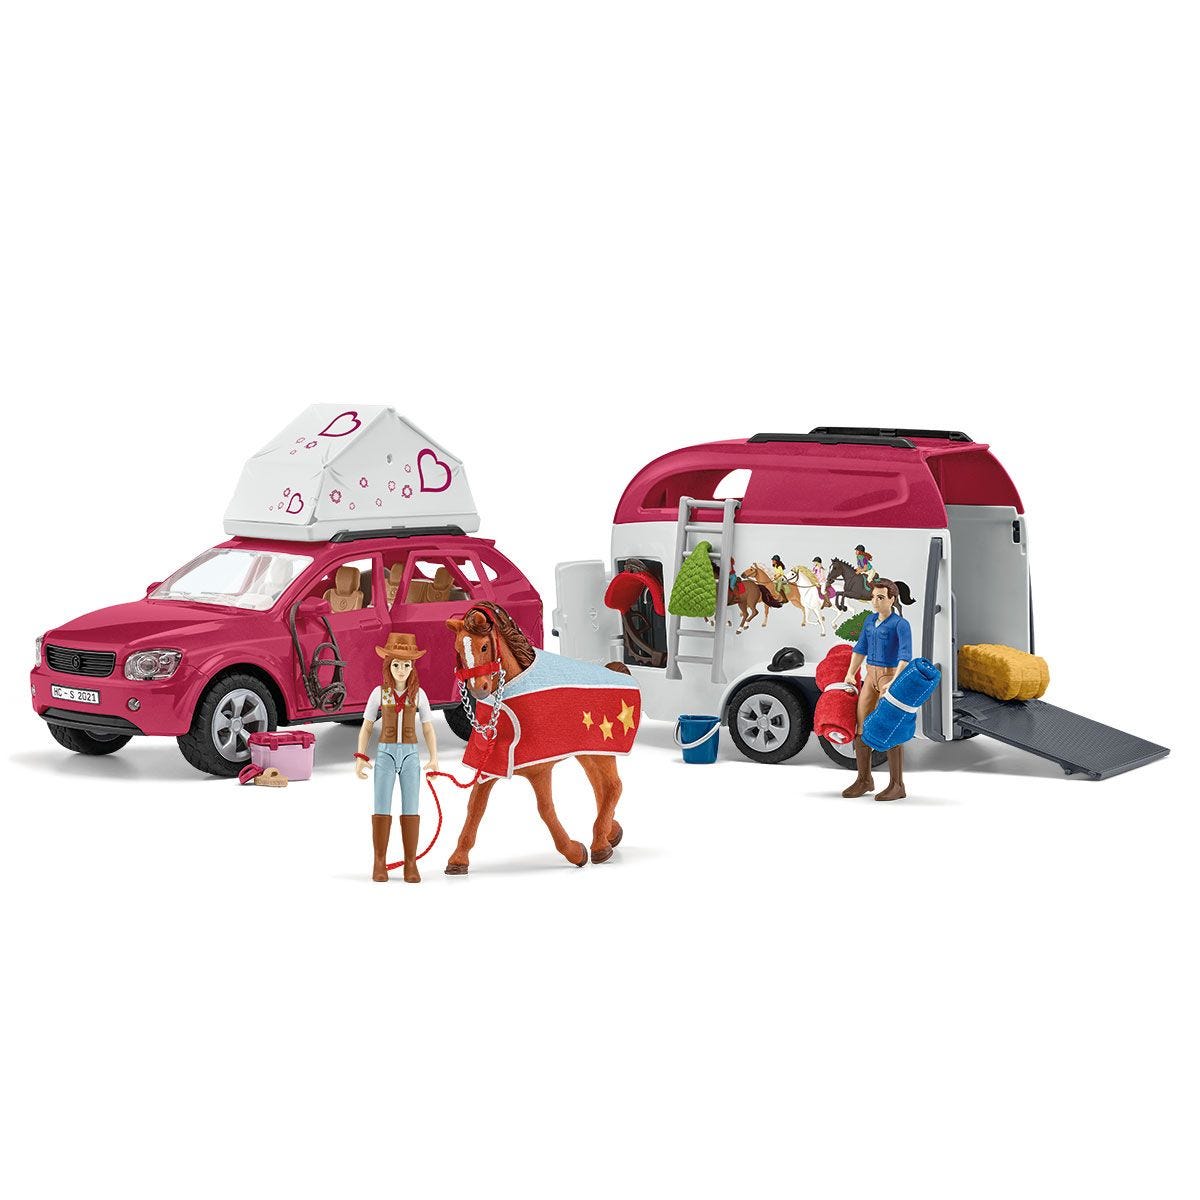 Product Image - Schleich 42535 - Horse Adventures with Car and Trailer - Horse Club